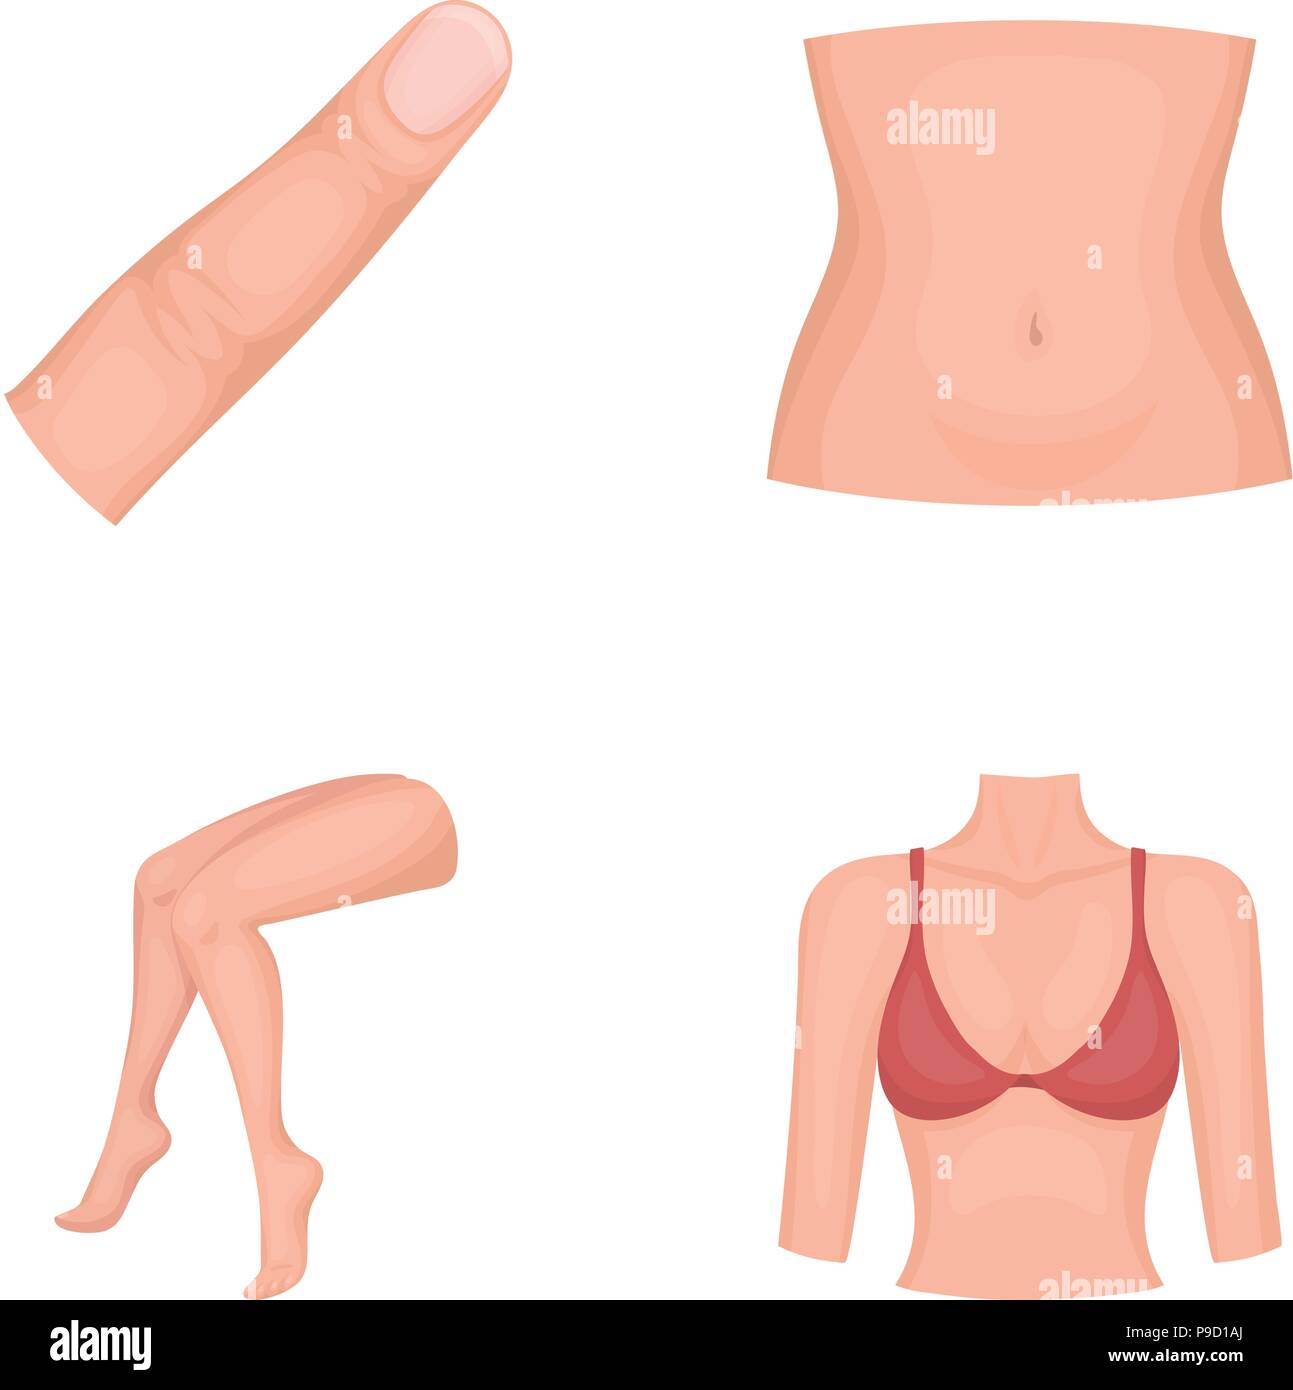 https://c8.alamy.com/comp/P9D1AJ/finger-female-feet-female-bust-part-of-the-body-set-collection-icons-in-cartoon-style-vector-symbol-stock-illustration-P9D1AJ.jpg